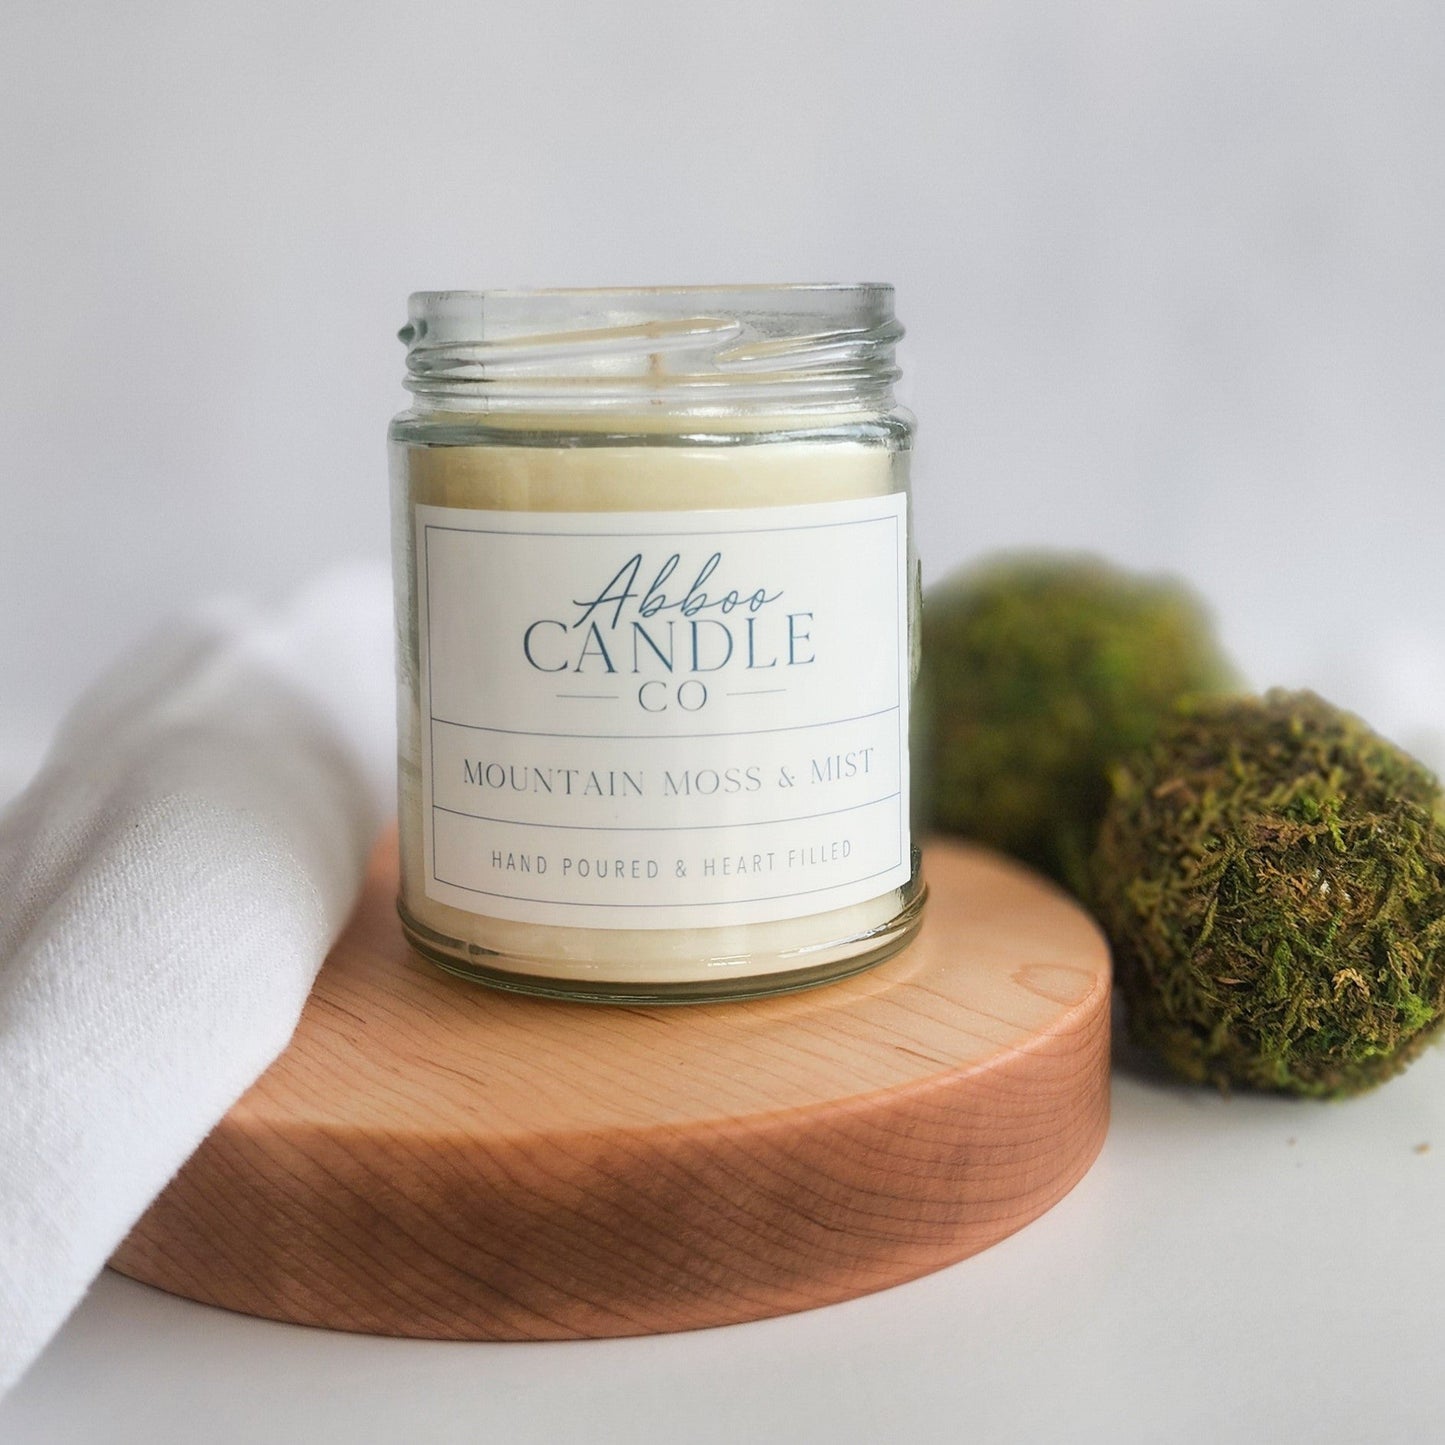 Mountain Moss and Mist Soy Candle - Abboo Candle Co